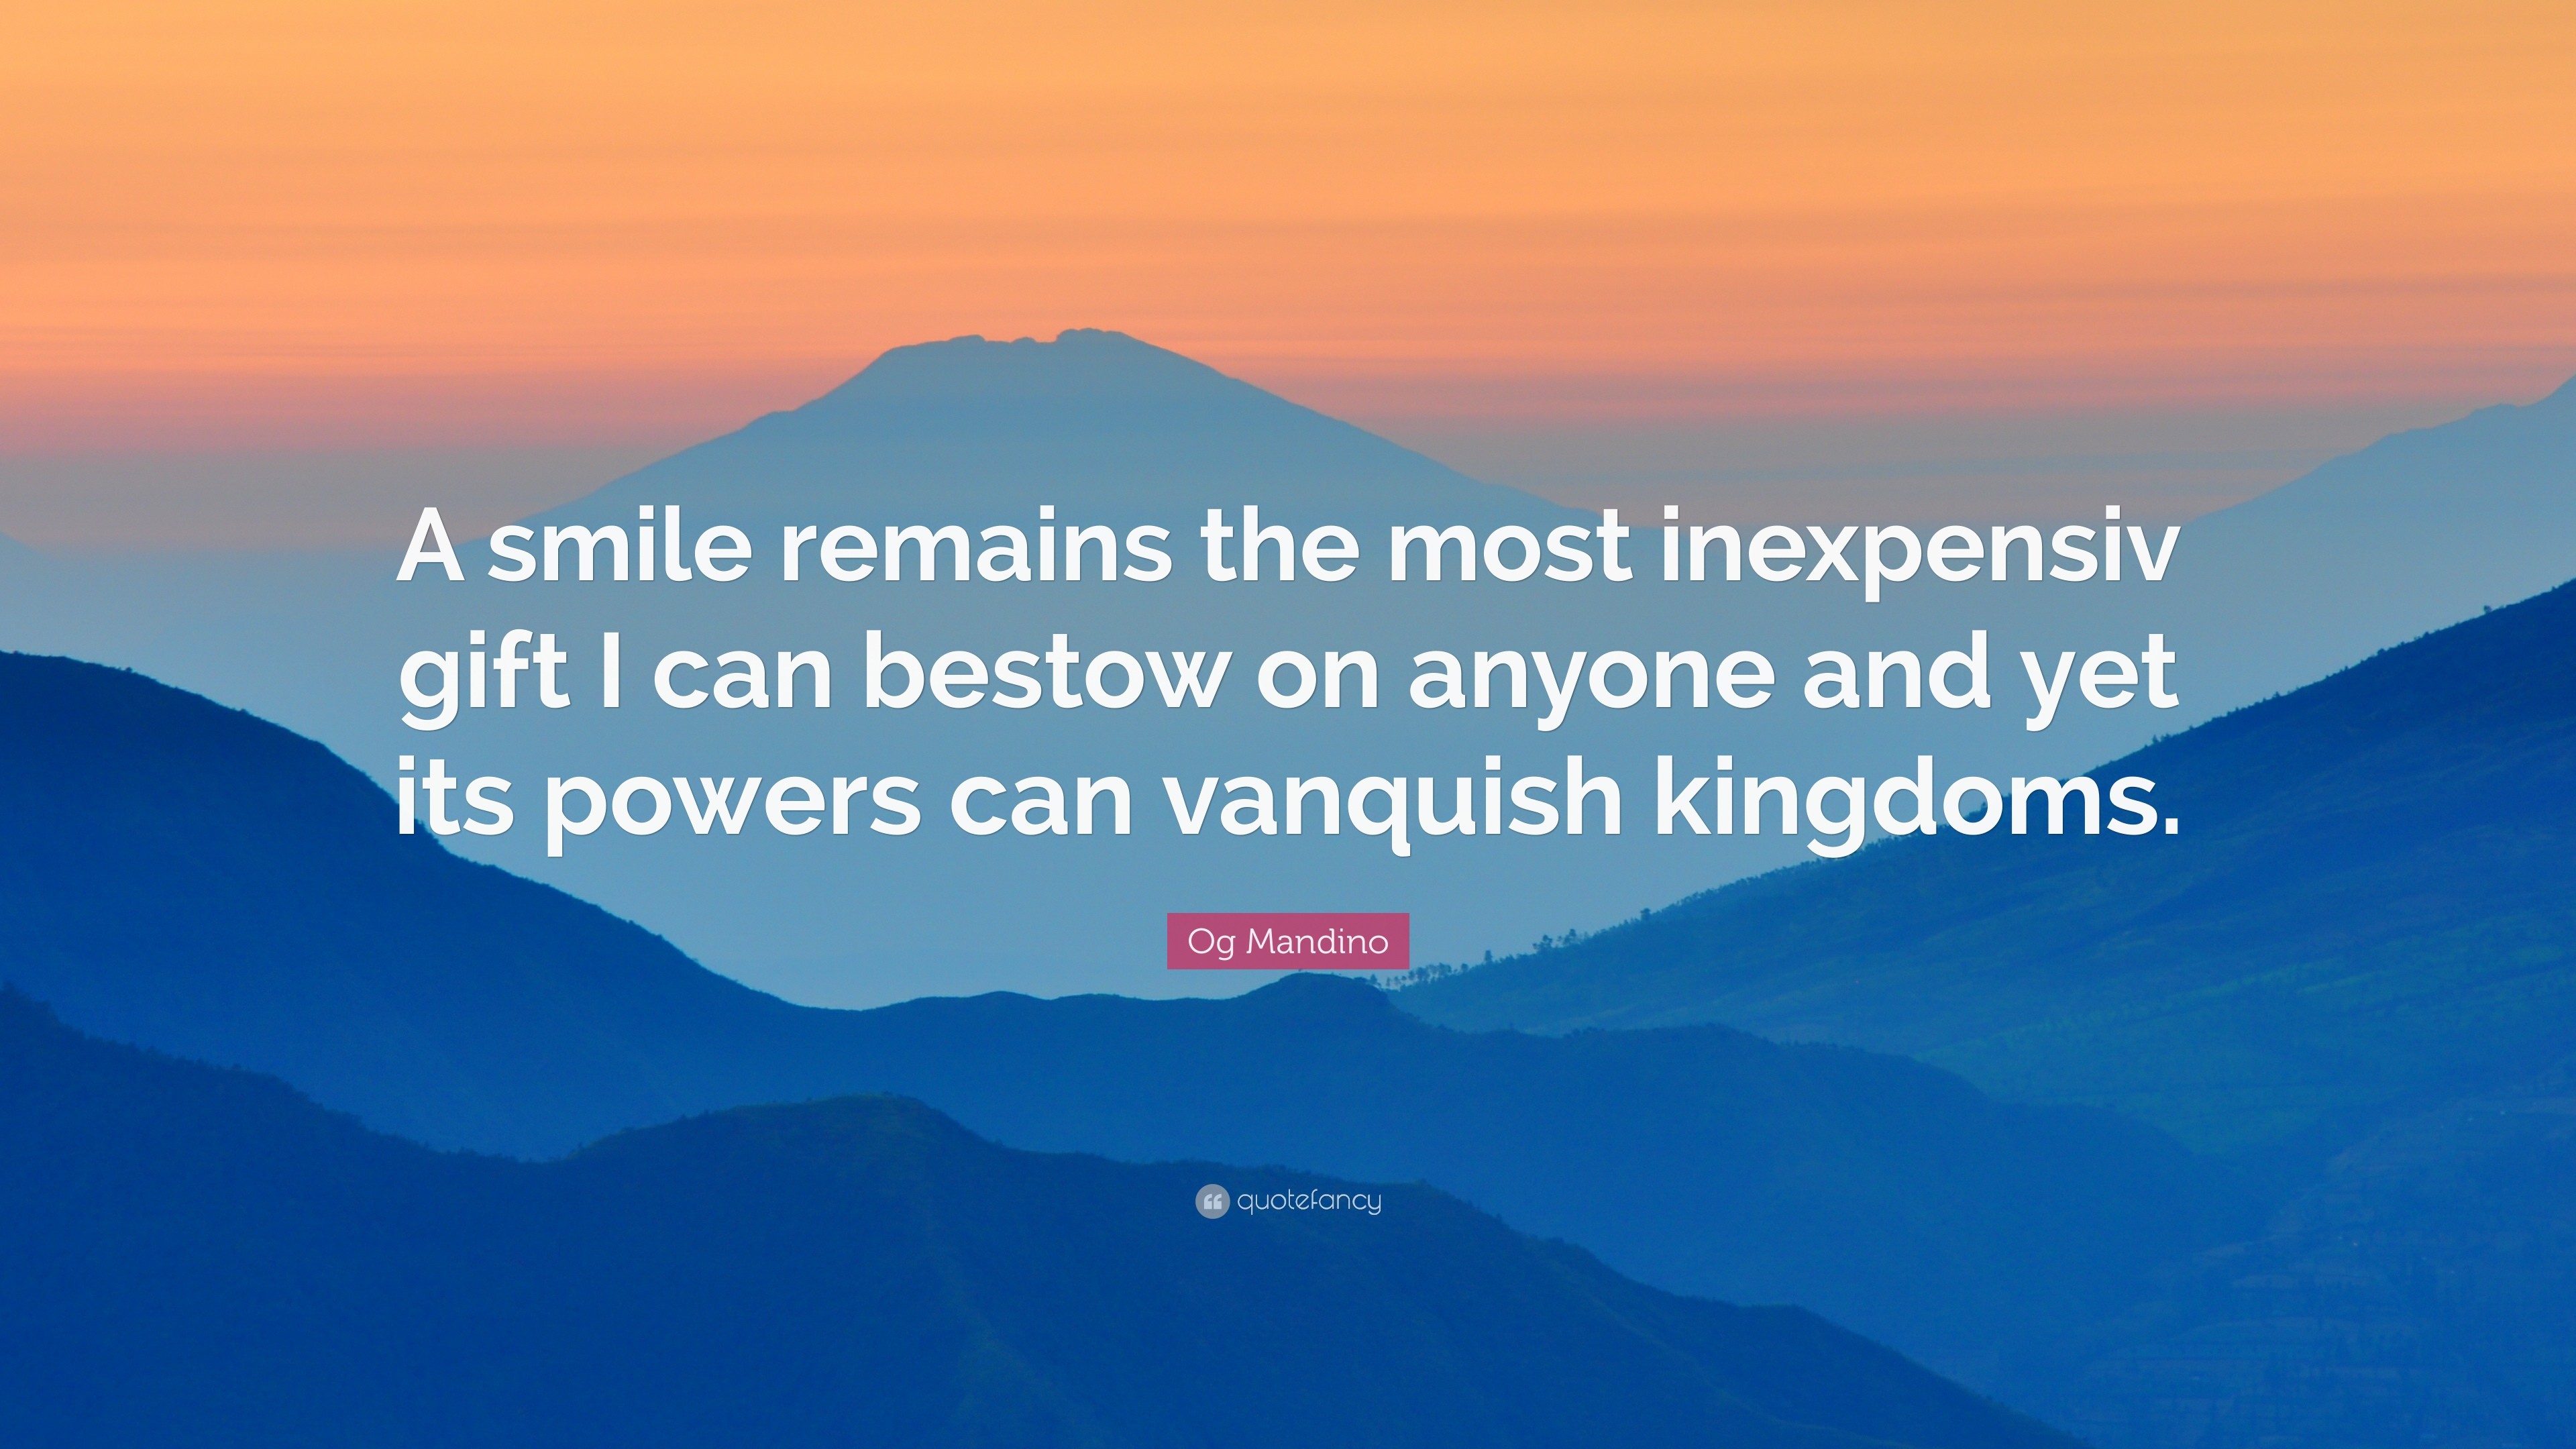 3840x2160 Og Mandino Quote: “A smile remains the most inexpensiv gift I can bestow on